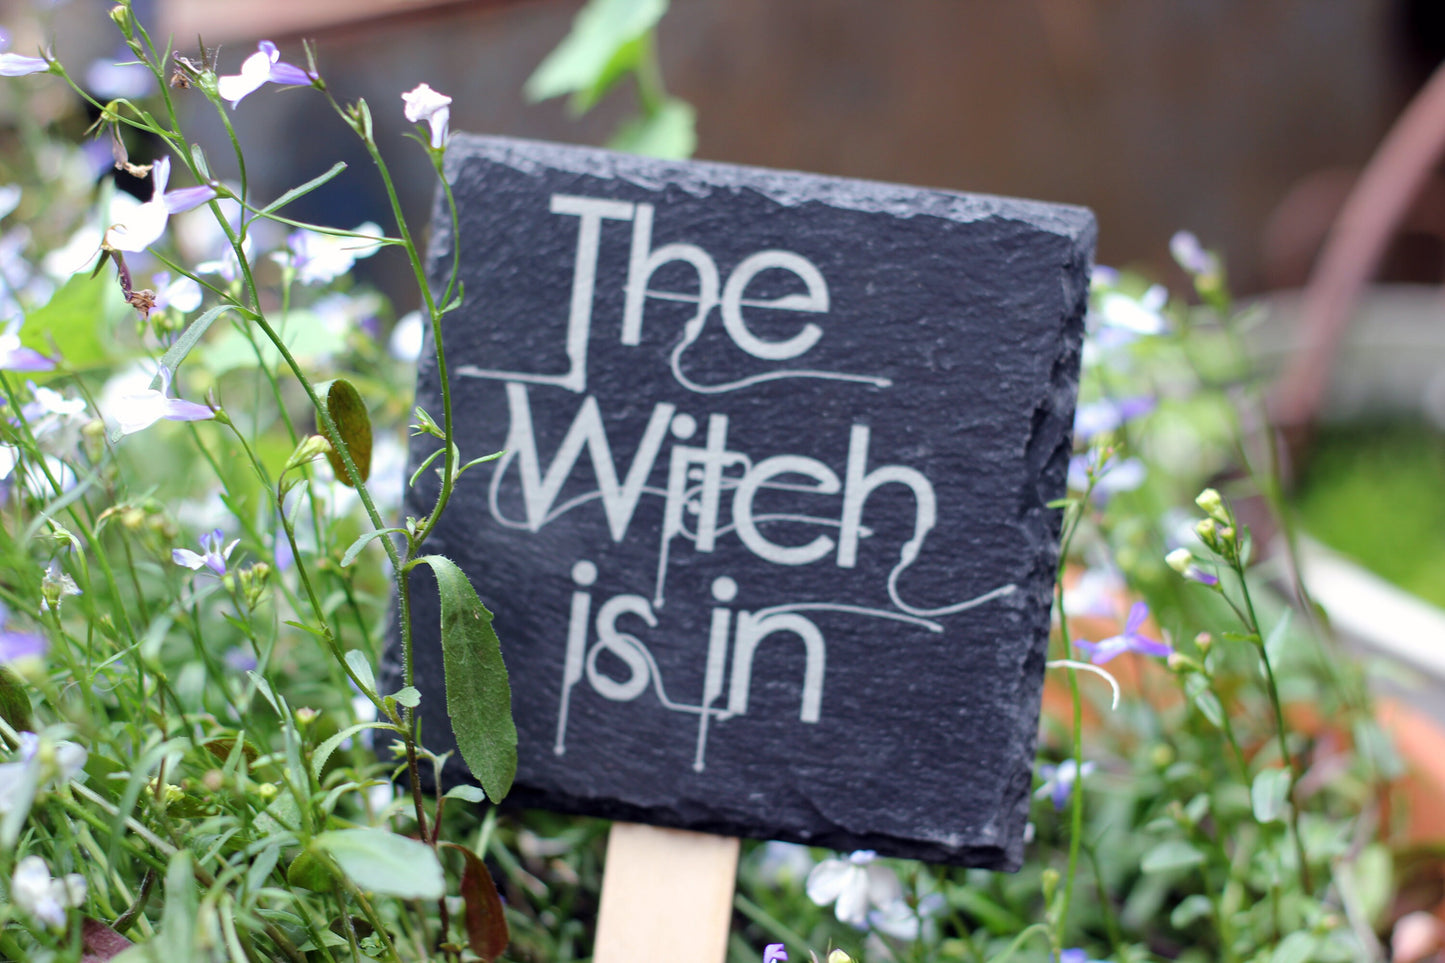 Fun slate sign, "The Witch is in", lovely Halloween decoration or Wicca gift for a witch to display all year round. A Gothic decoration.